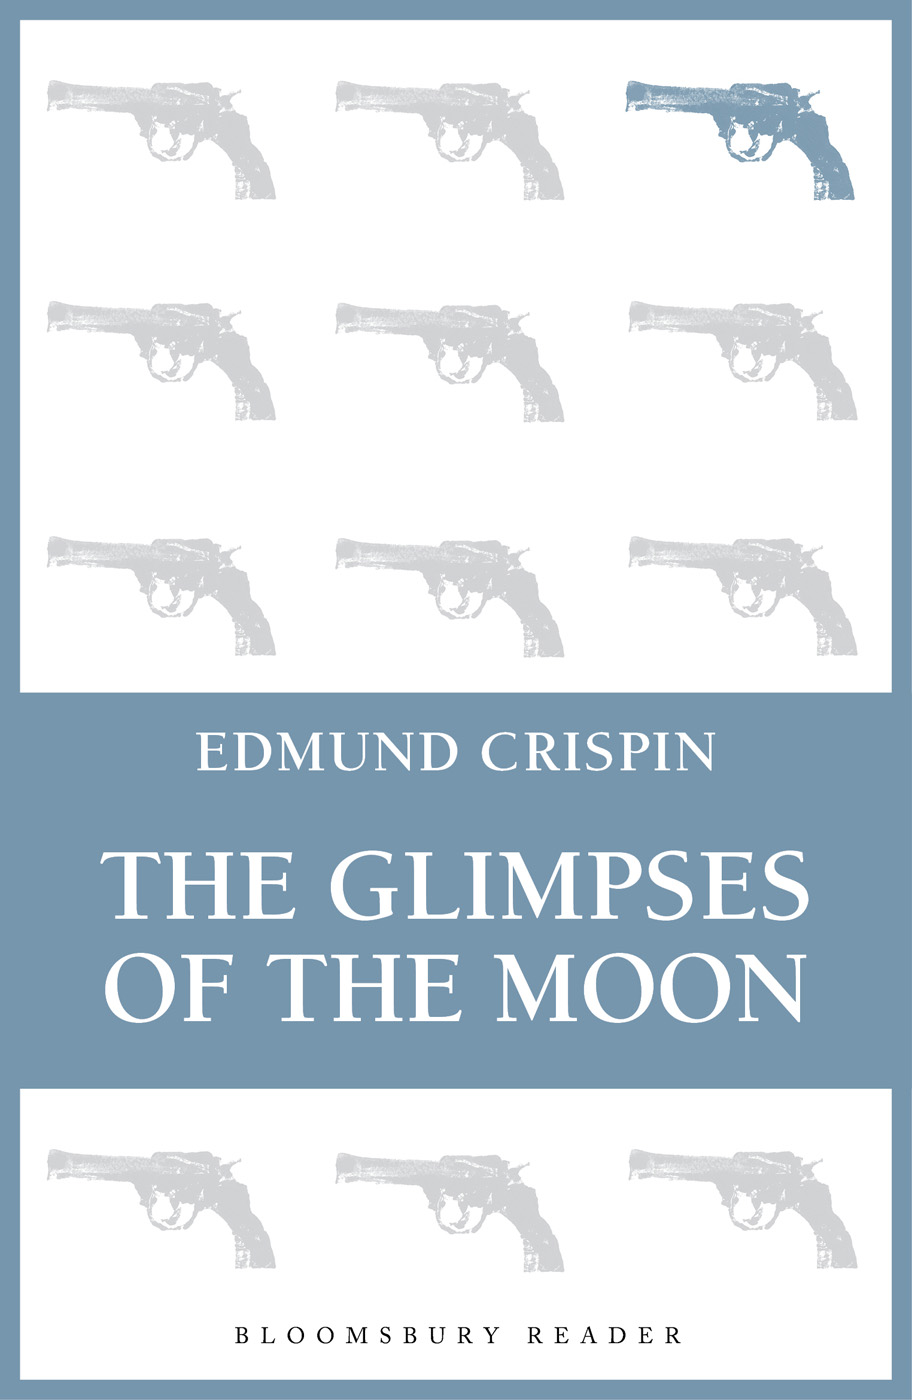 The Glimpses of the Moon (1977)